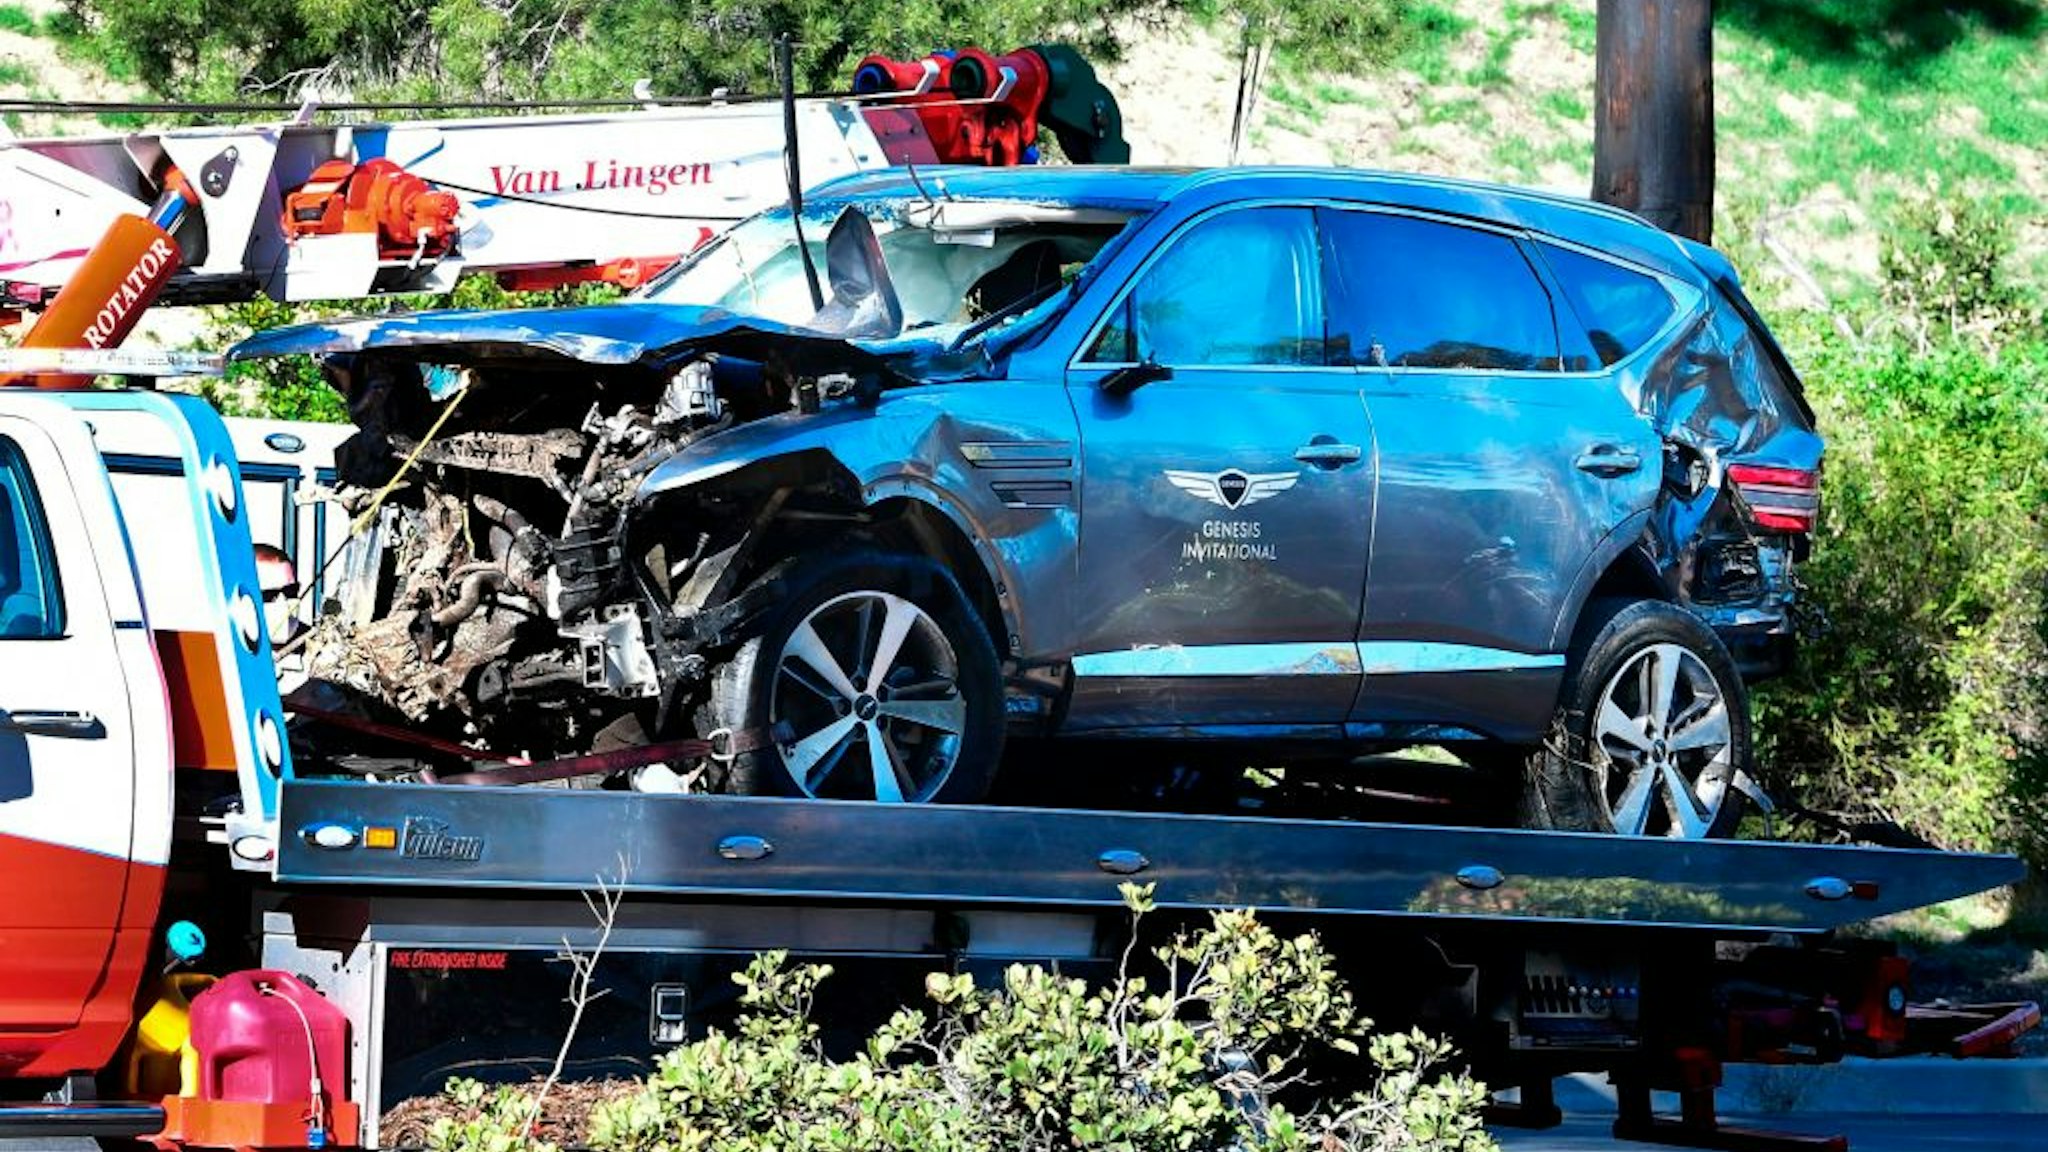 A tow truck recovers the vehicle driven by golfer Tiger Woods in Rancho Palos Verdes, California, on February 23, 2021, after a rollover accident. - Woods was hospitalized Tuesday after a car crash in which his vehicle sustained "major damage," the Los Angeles County Sheriff's department said. Woods, the sole occupant, was removed from the wreckage by firefighters and paramedics, and suffered "multiple leg injuries," his agent said in a statement to US media.